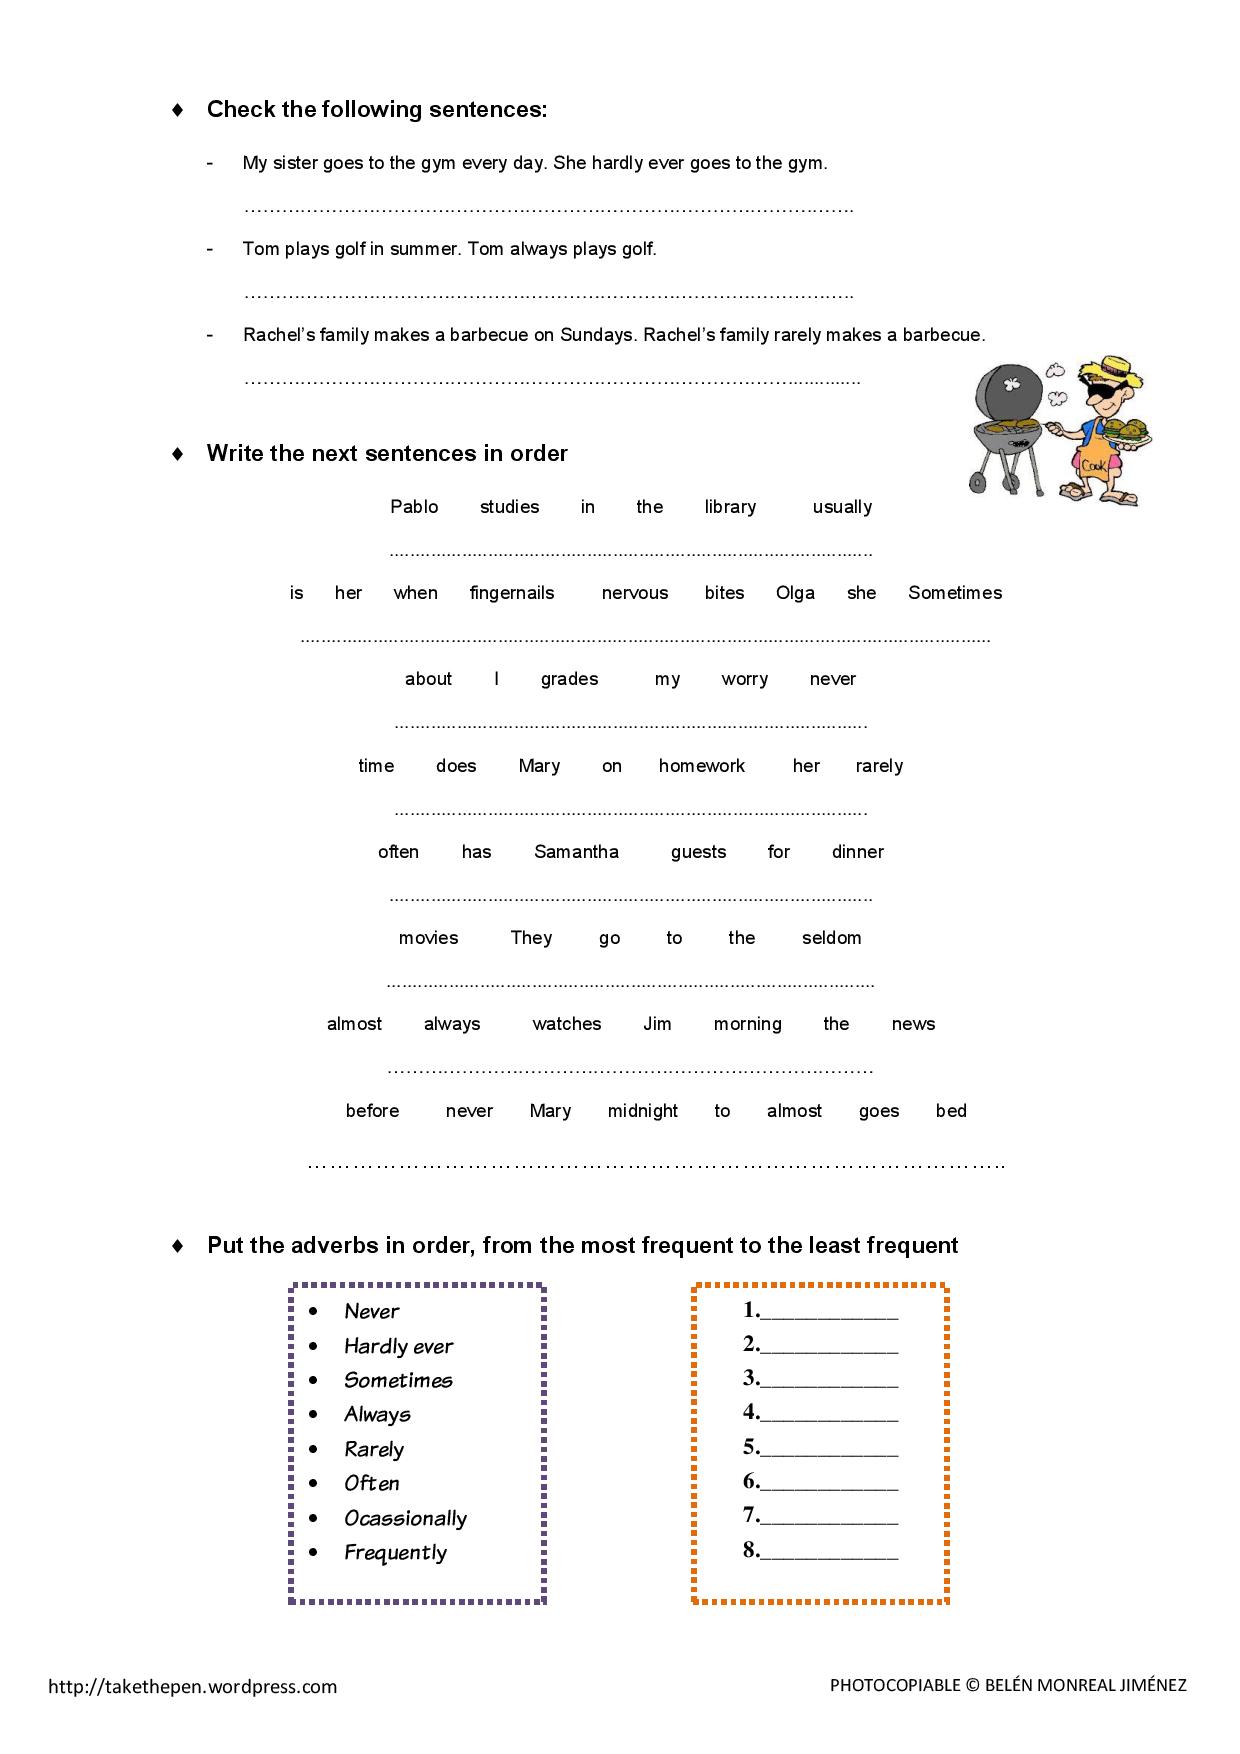 frequency-adverbs-worksheet-take-the-pentake-the-pen